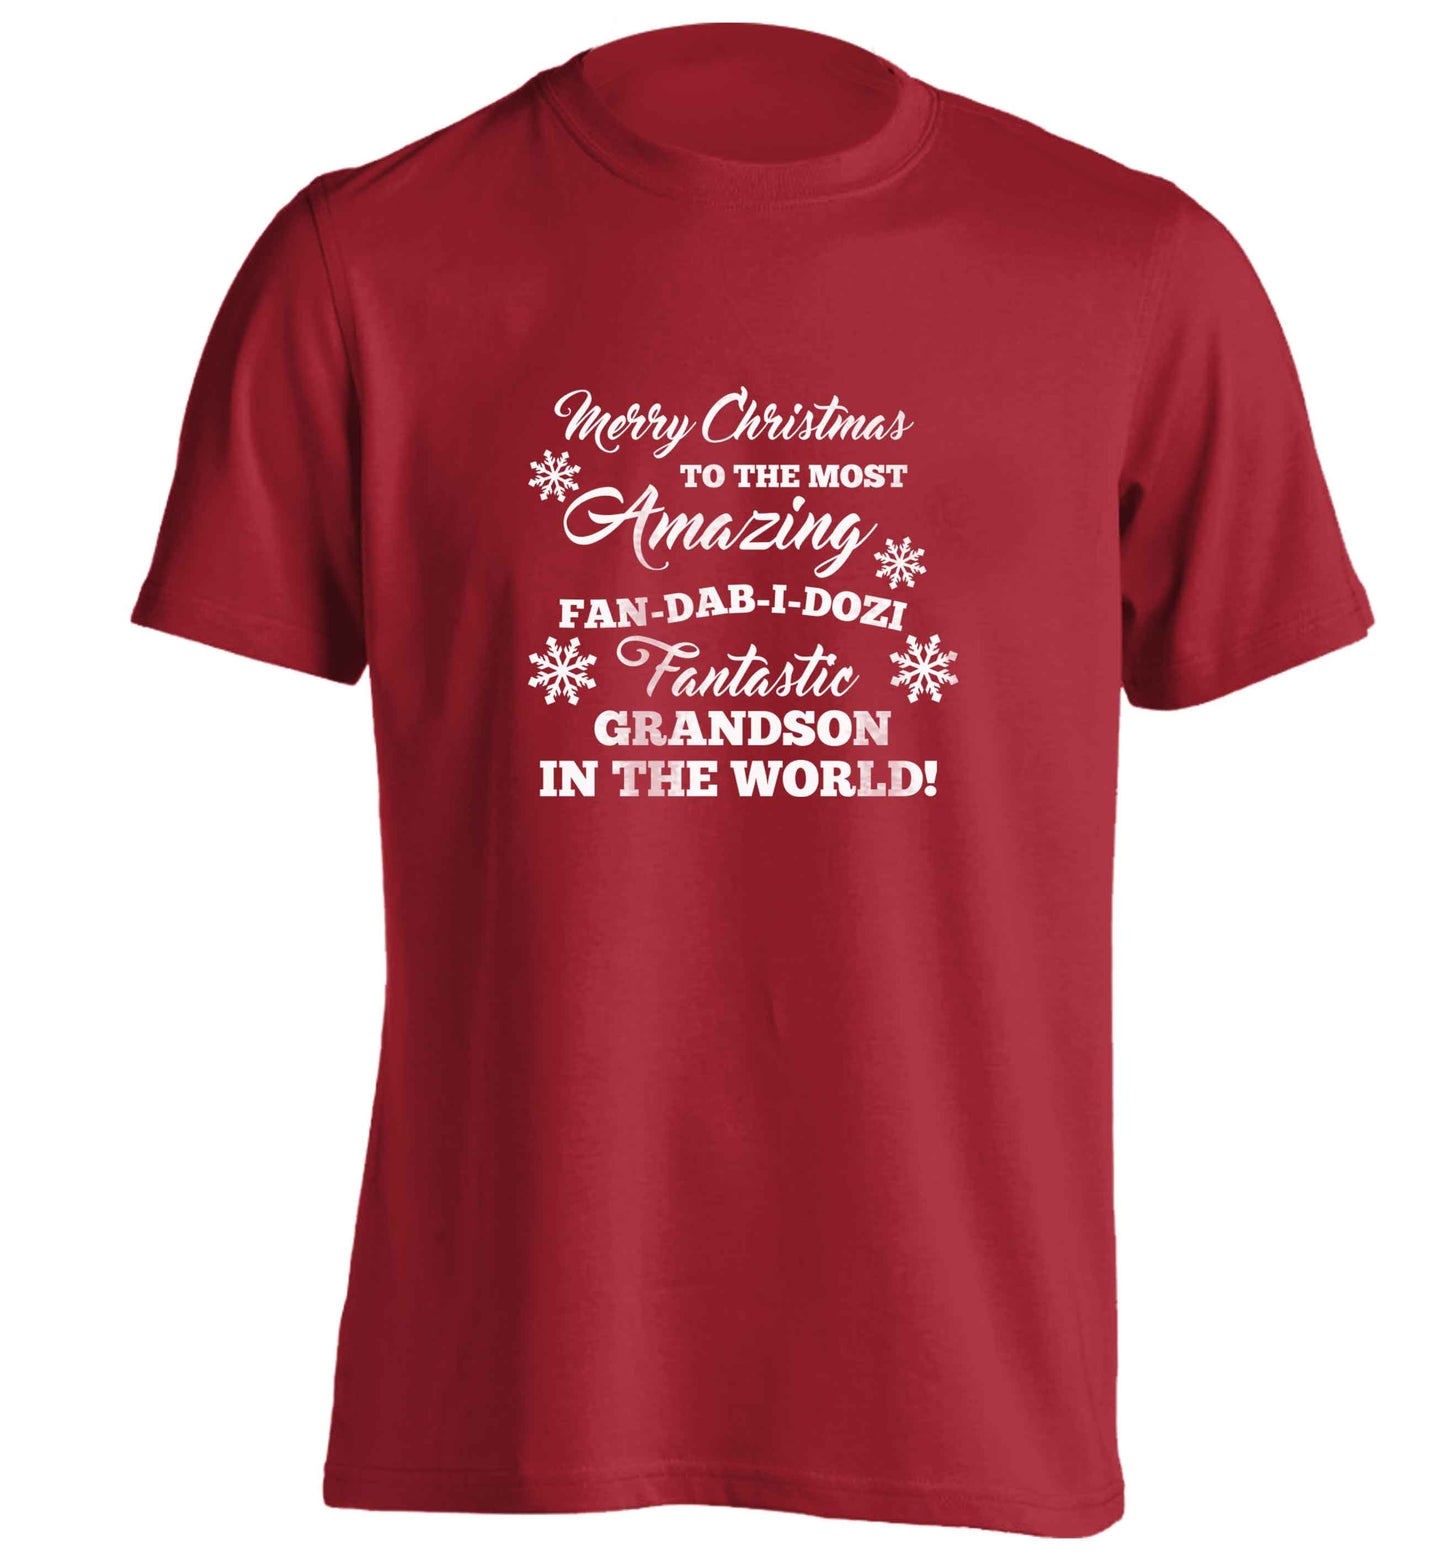 Merry Christmas to the most amazing fan-dab-i-dozi fantasic Grandson in the world adults unisex red Tshirt 2XL